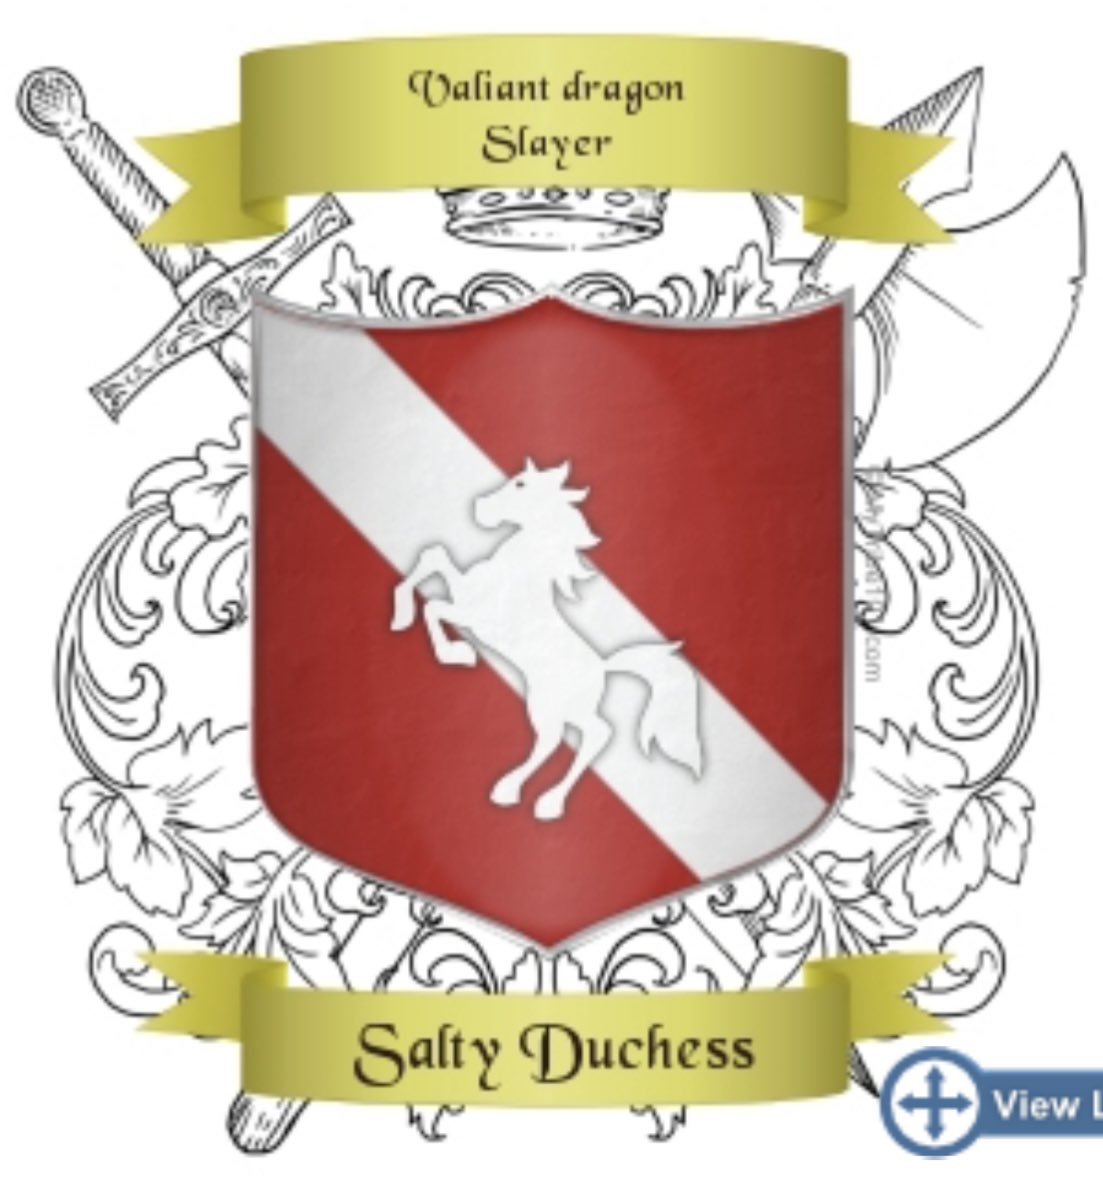 I would like to proclaim my coat of arms  ‘Salty Duchess’ has been finalised. It was commissioned overnight and proudly displays a sweet nod to my heritage. My office is now open for enquires and bookings. #SaltyDuchess.con